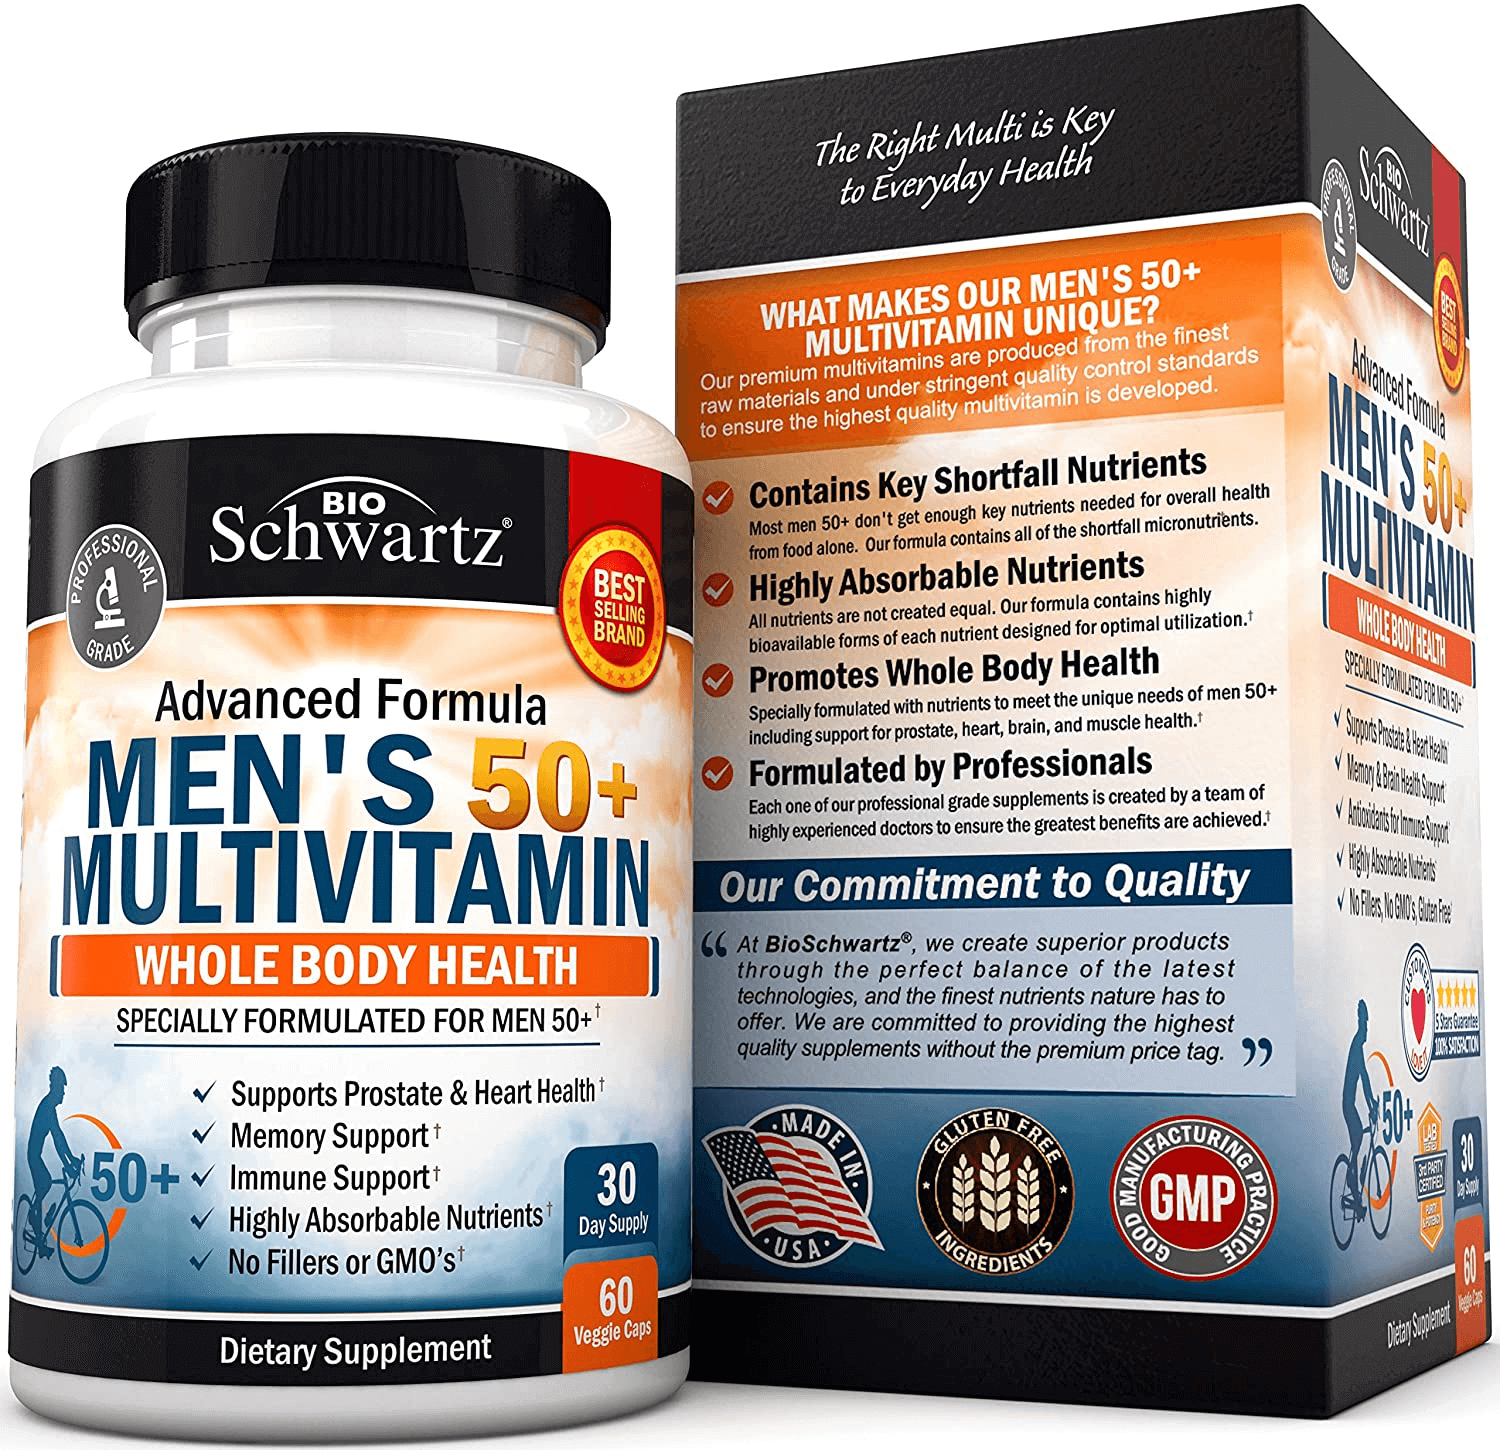 Once Daily Multivitamin for Men 50 and over - Supplement for Heart Health Support - with Zinc, A, B, C, D3, E Vitamins - for Memory & Brain Health Support - Designed for Whole Body Health - 60 Count - vitamenstore.com